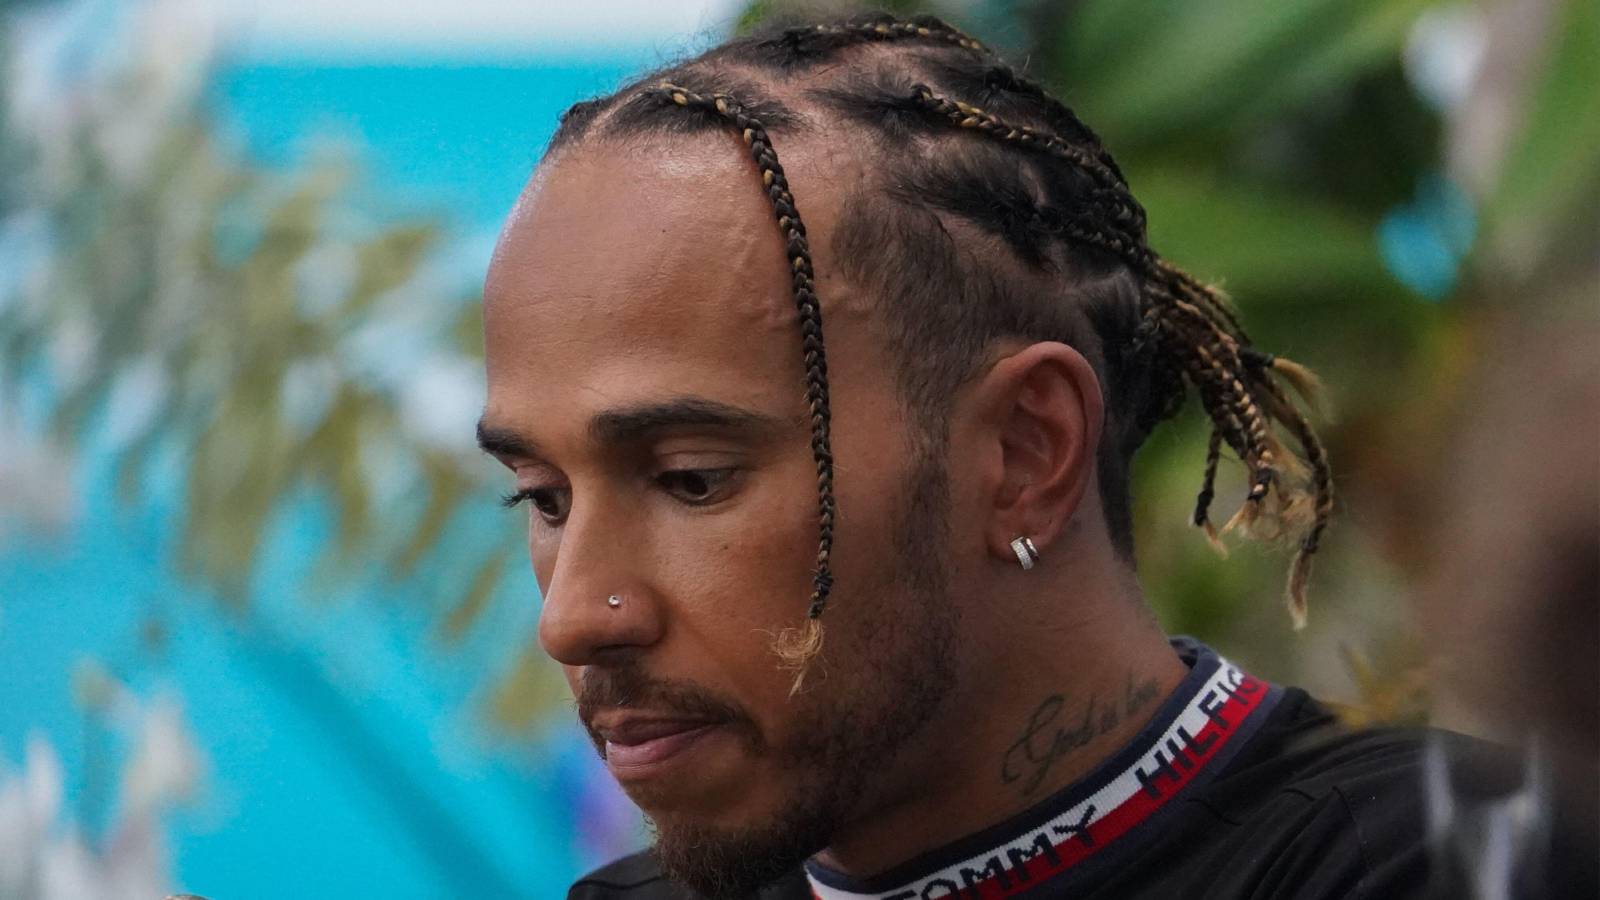 Lewis Hamilton with piercings visible. Miami May 2022.